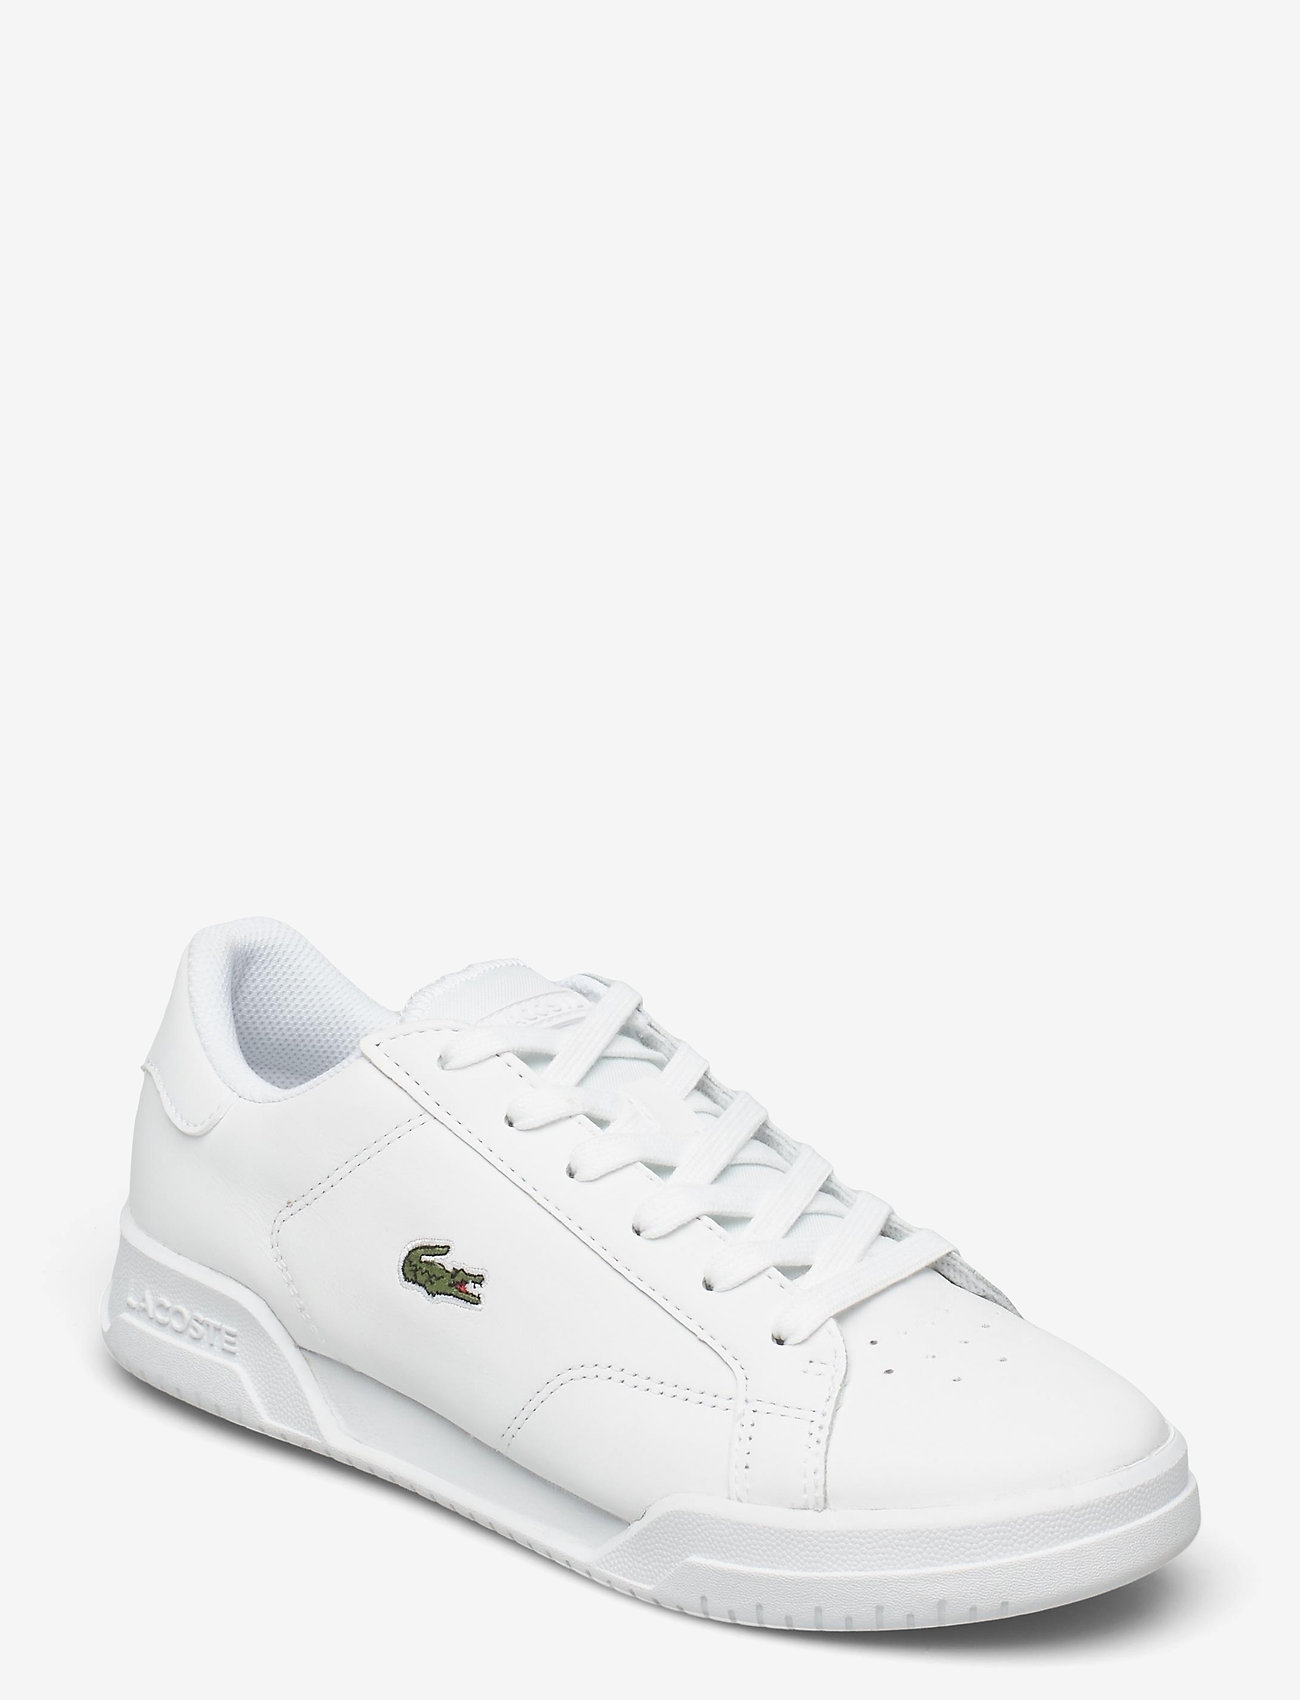 Lacoste Shoes Twin Serve 0721 2 Sf - Low top sneakers | Boozt.com